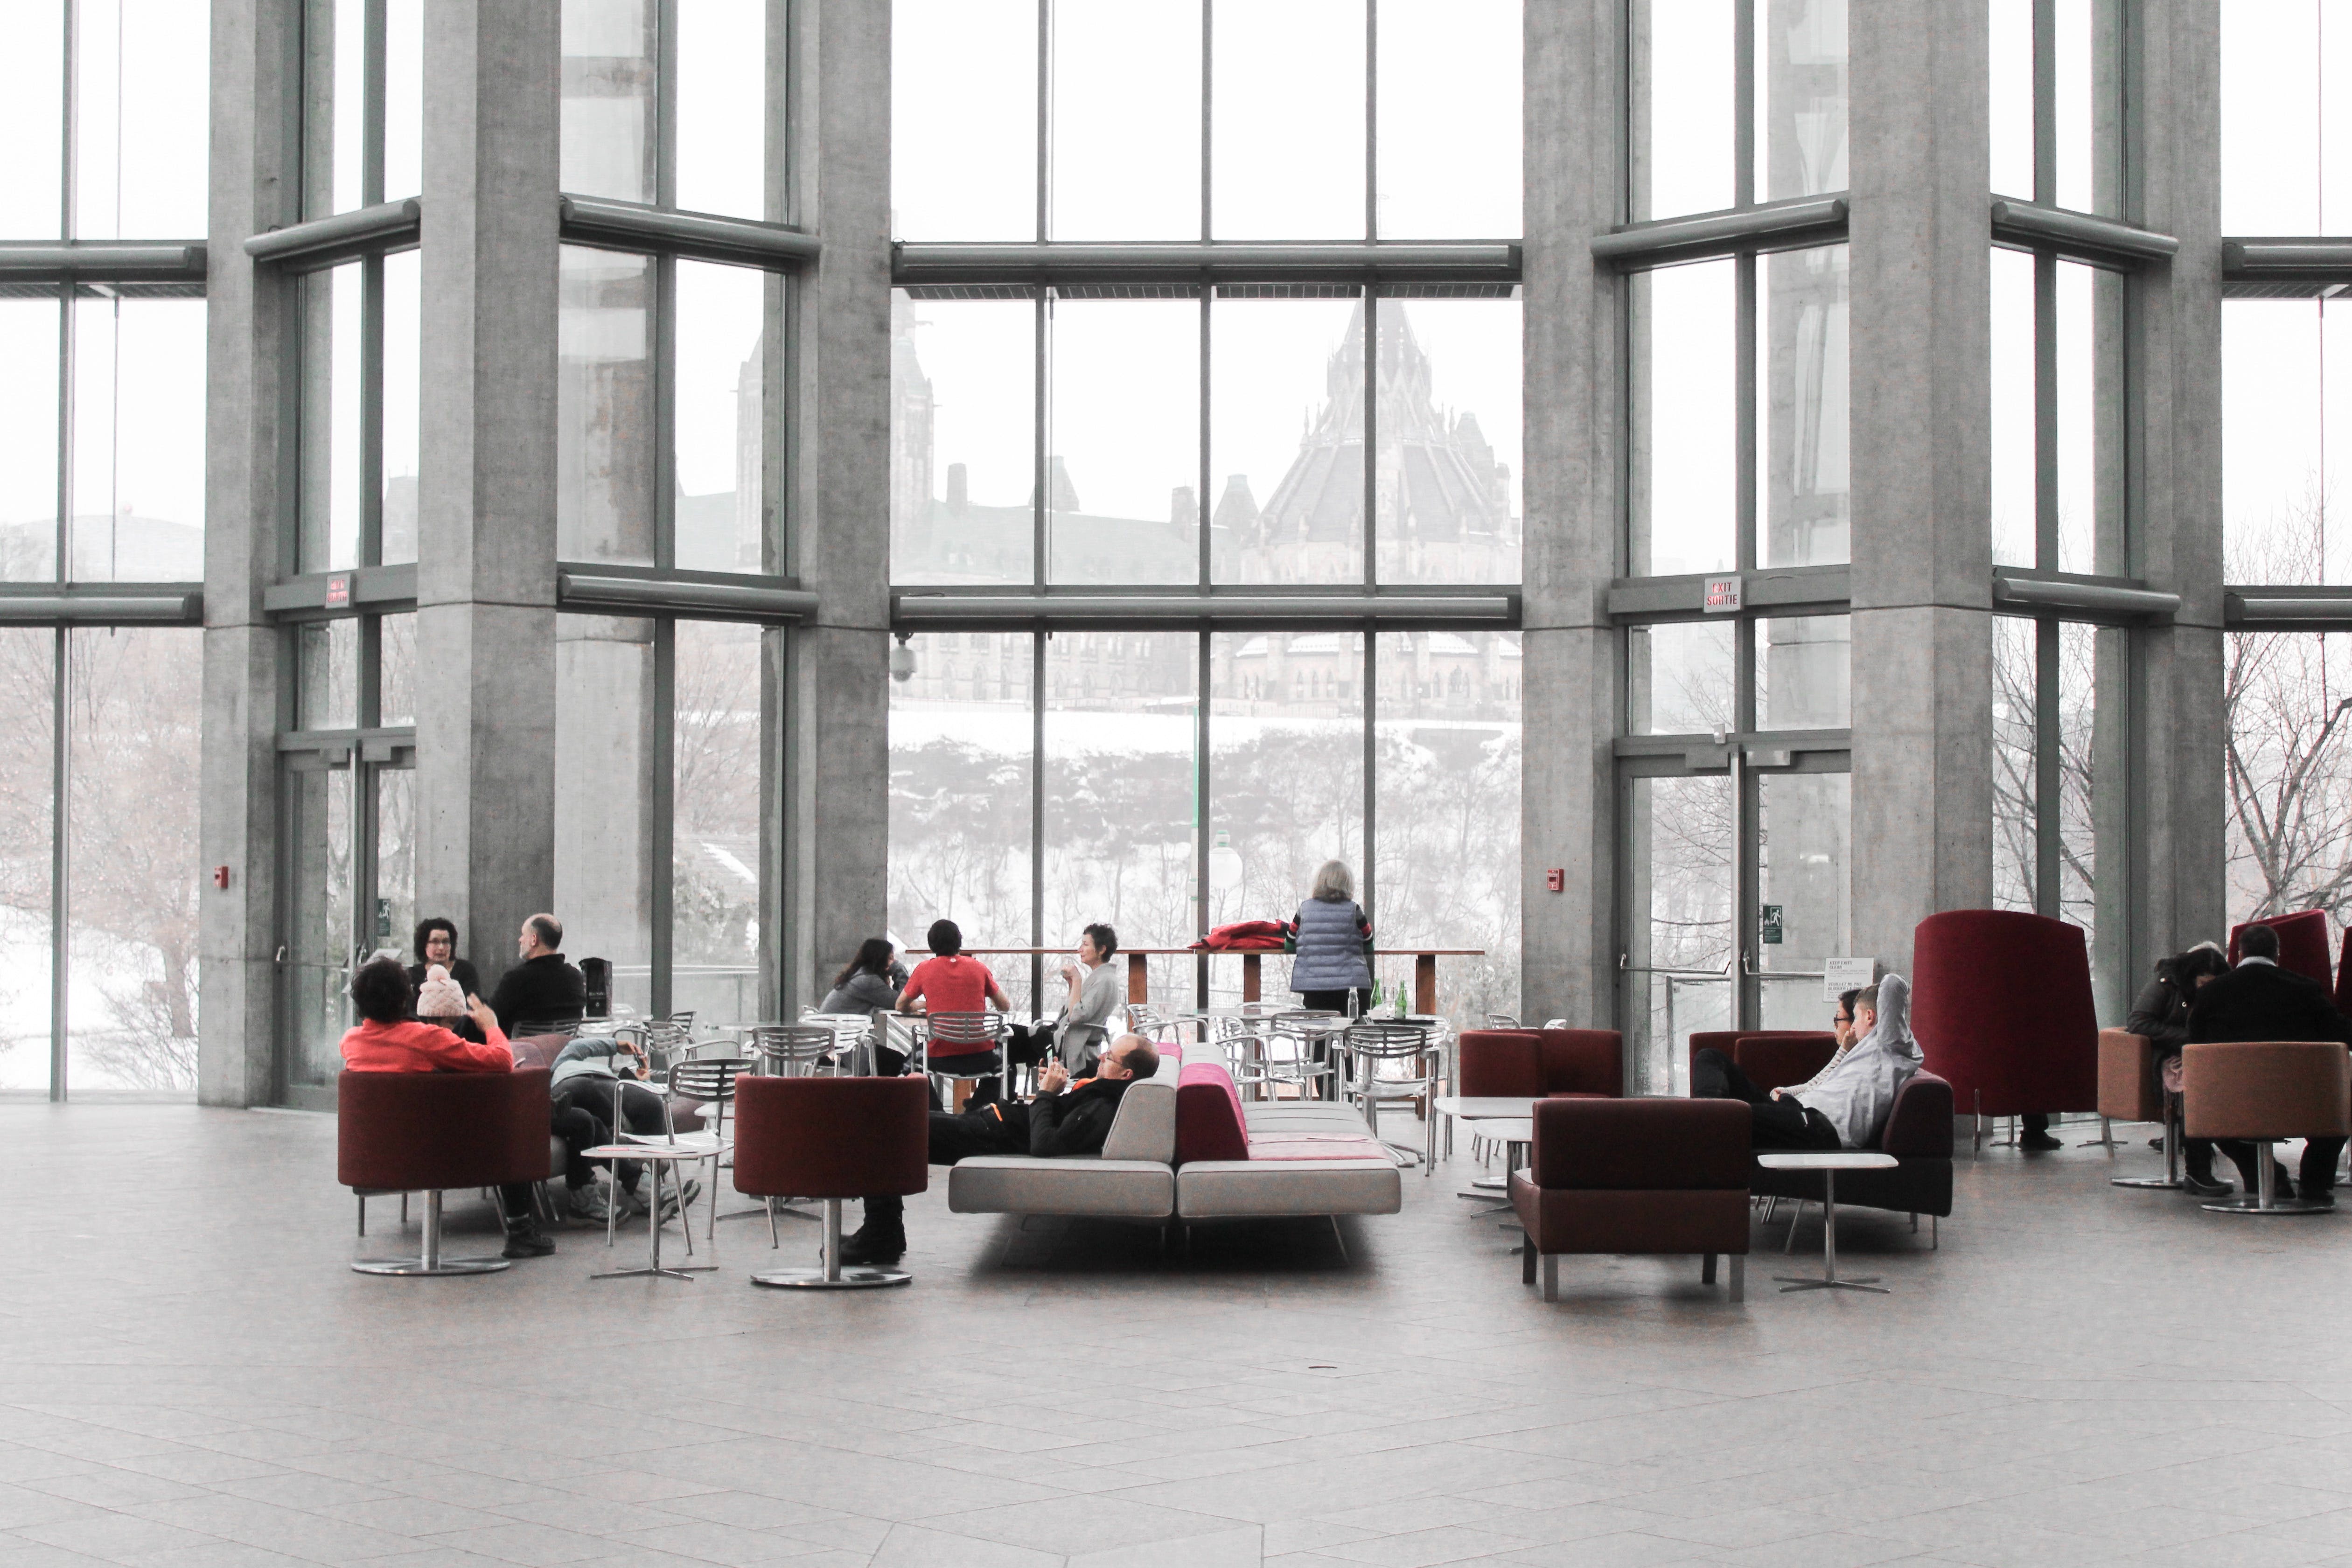 An airport lounge | Source: Pexels